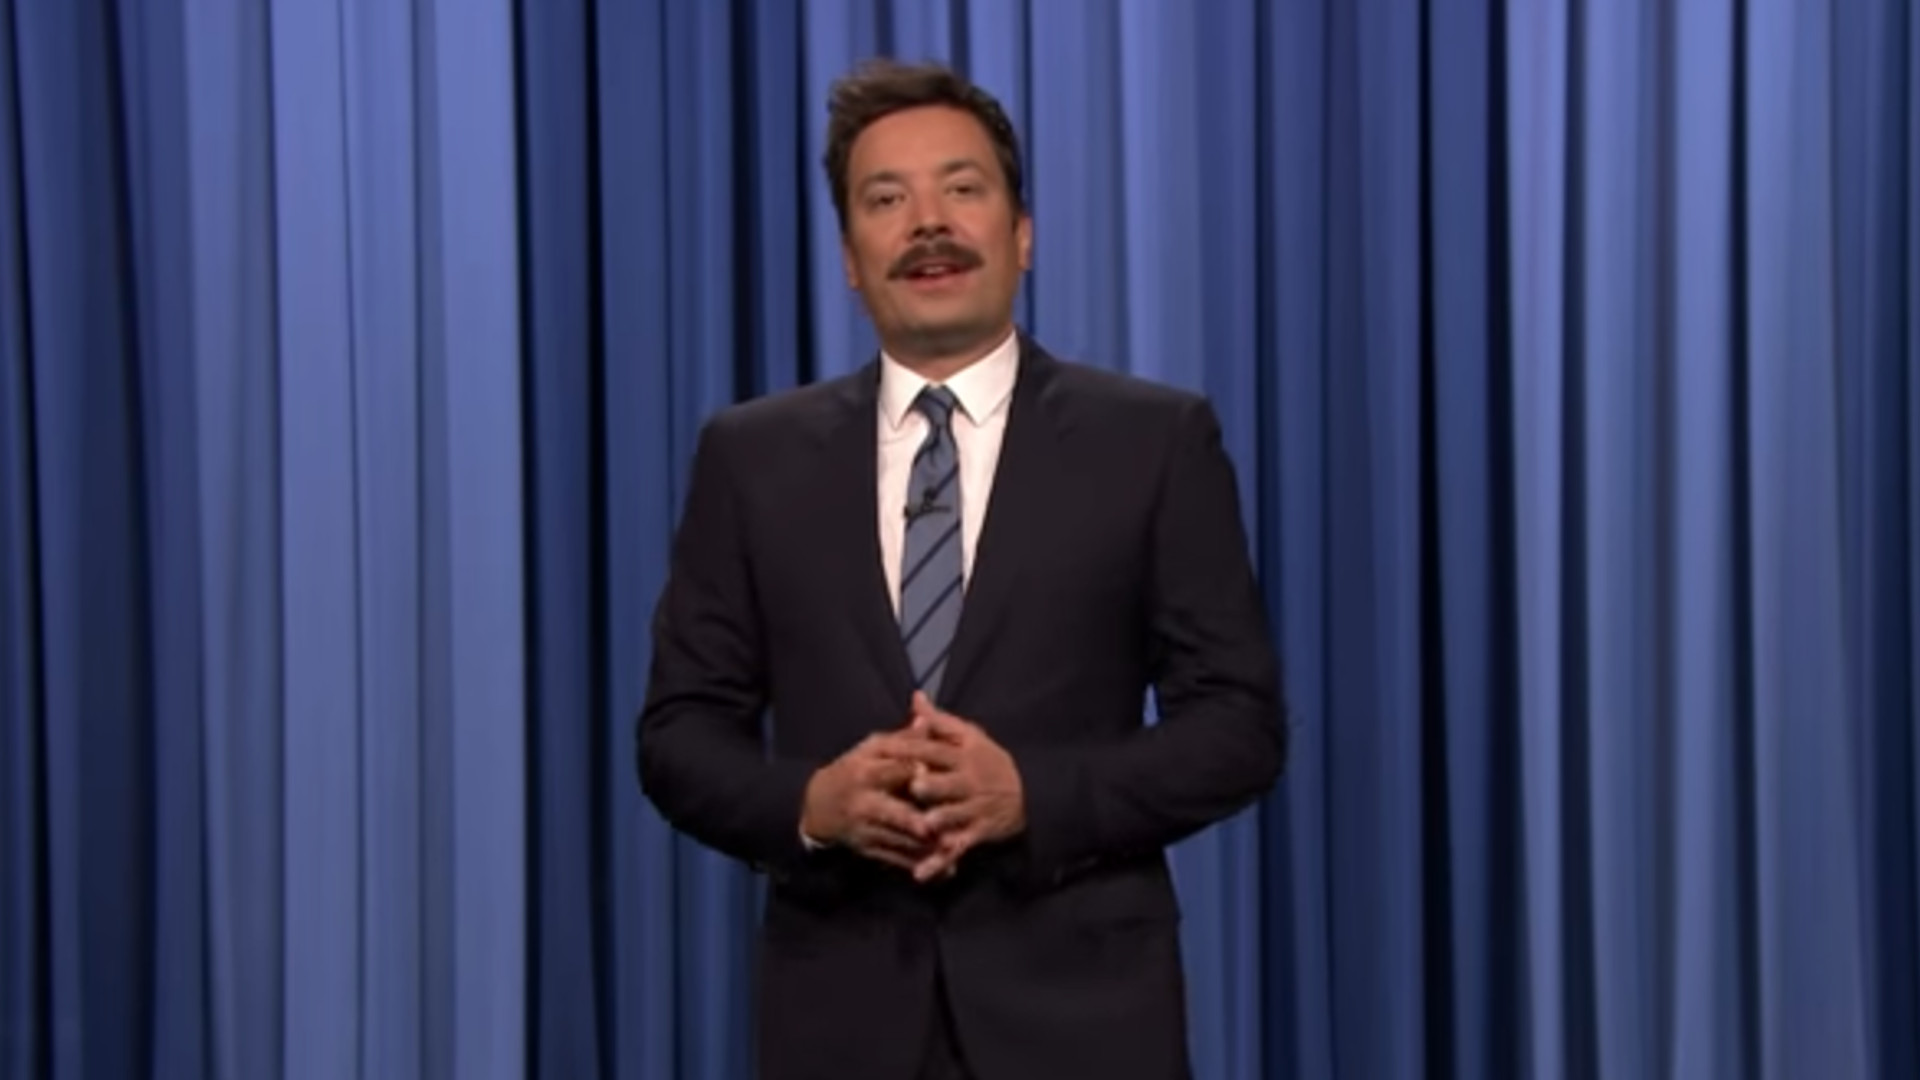 So witzig kommentiert Jimmy Fallon den "Independence Day"